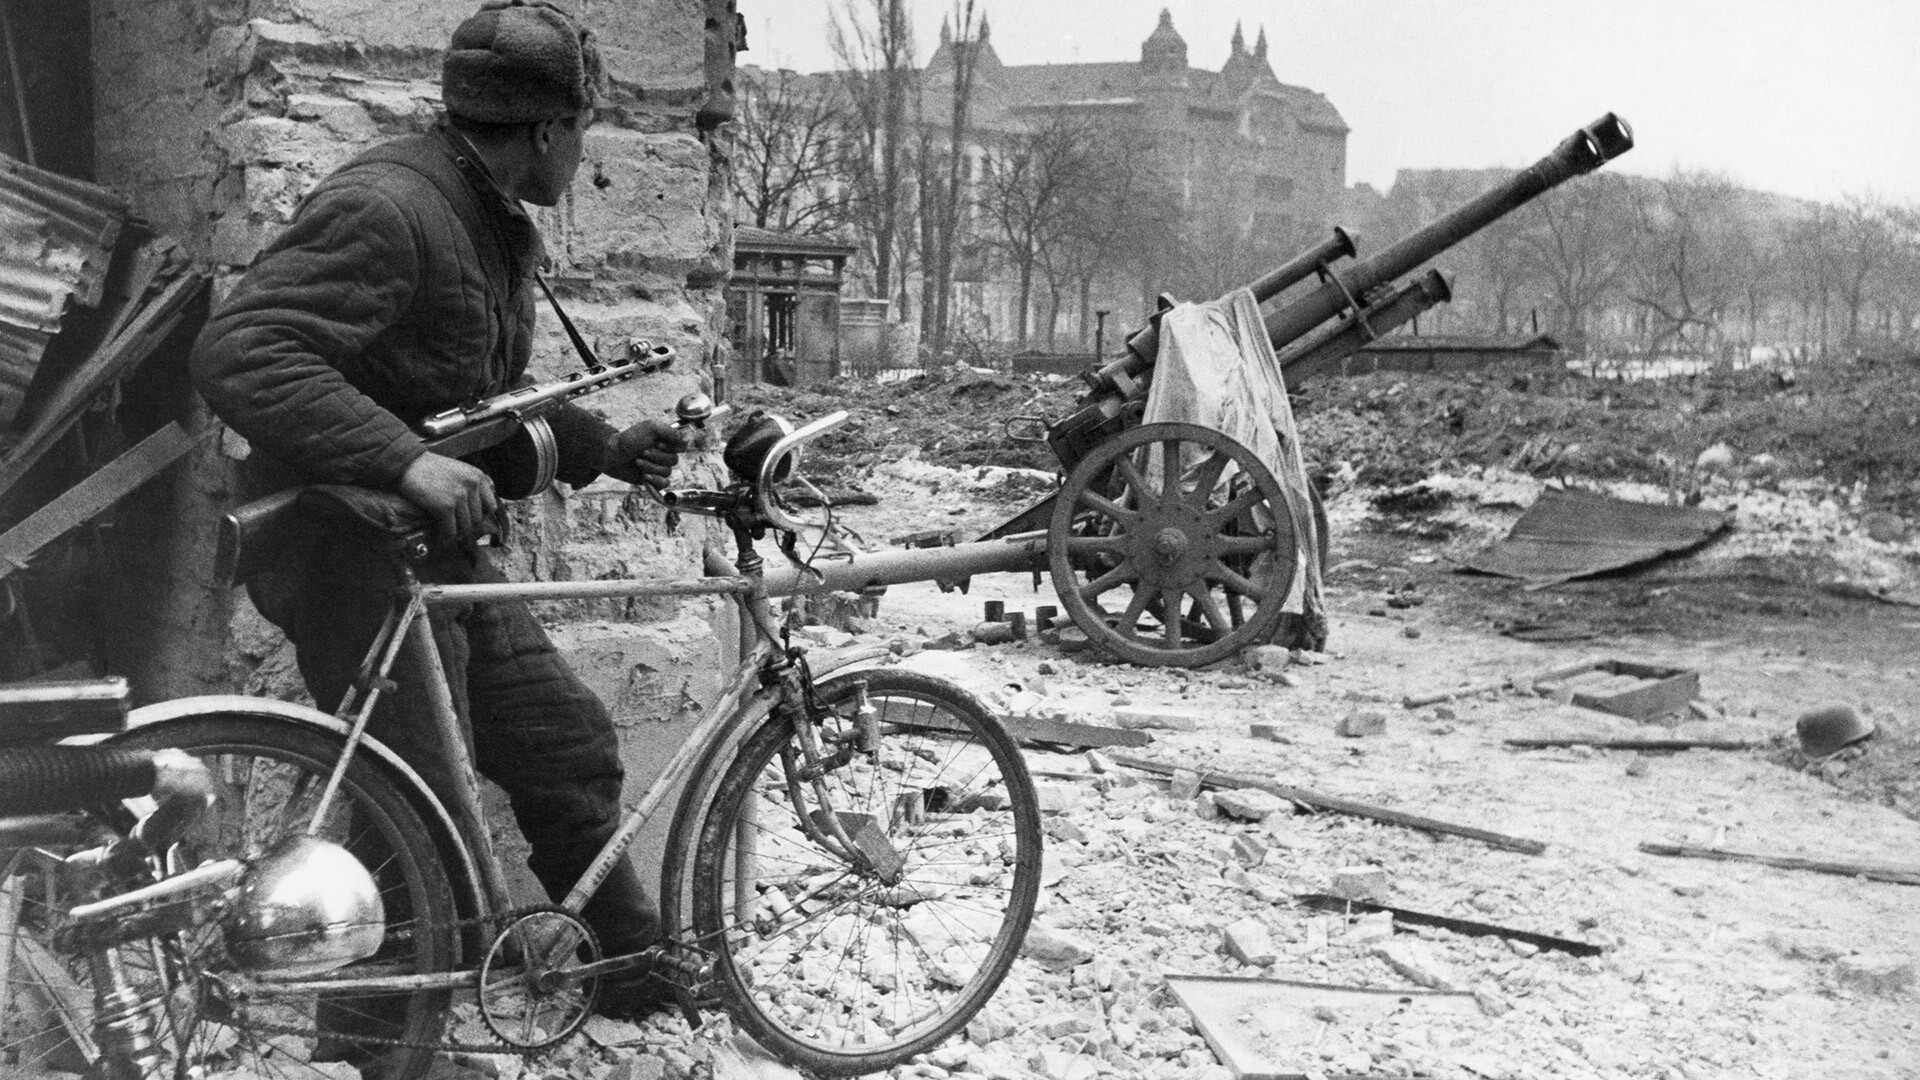 Soviet soldier during the Battle for Budapest.